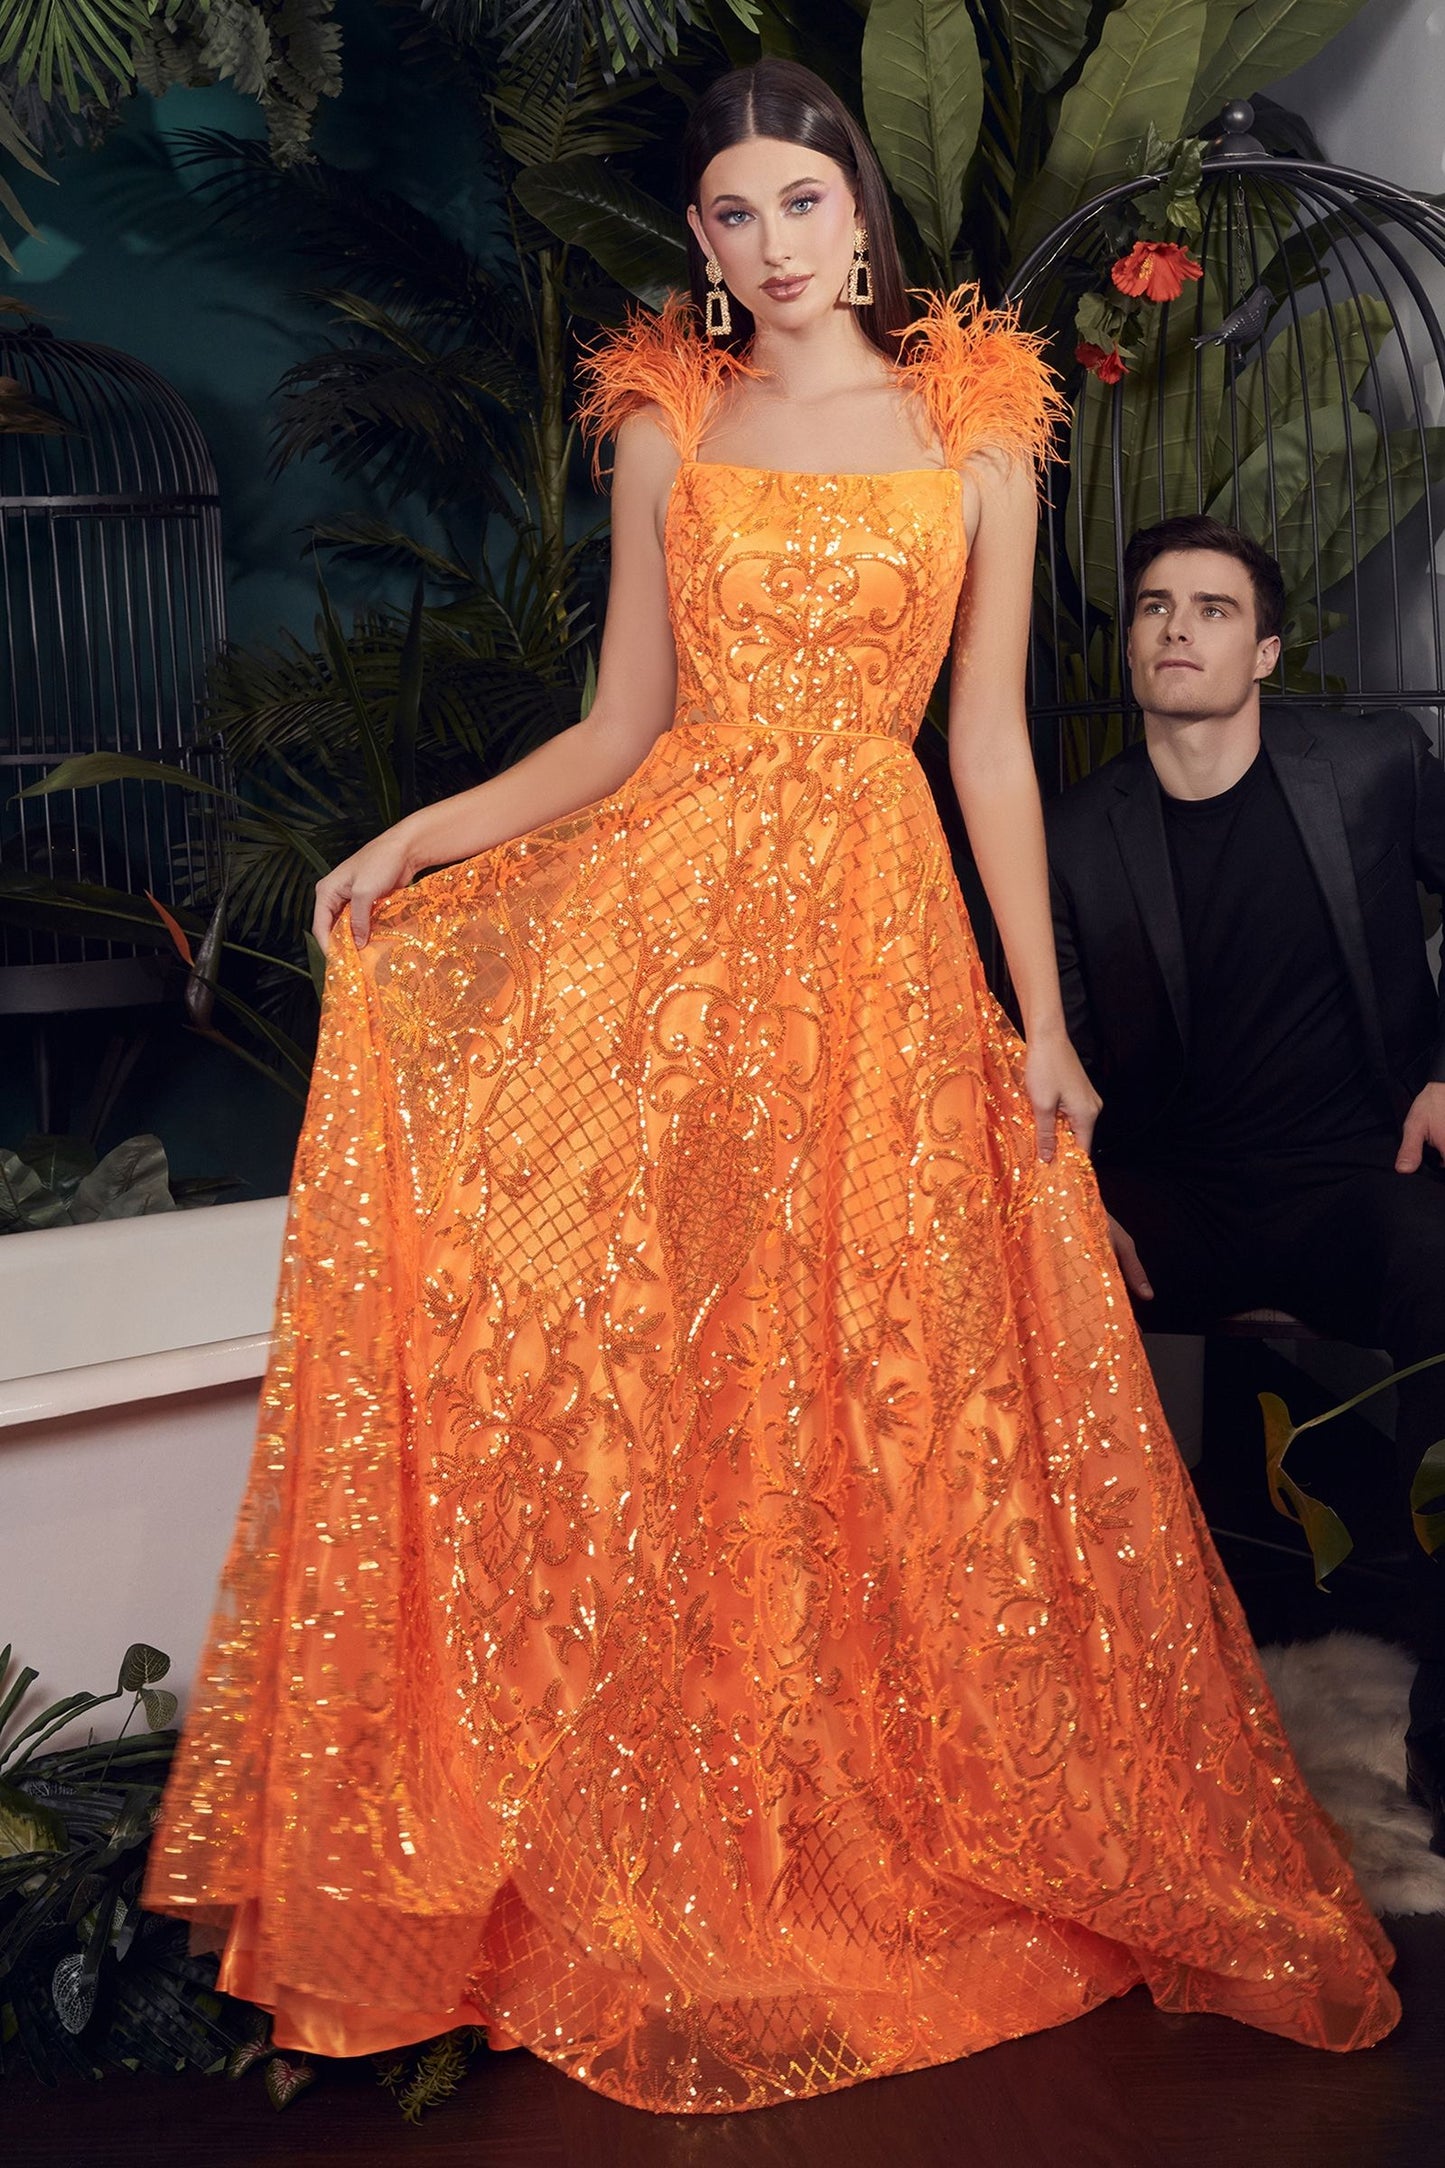 Neon Orange Ball Gown With Feathers